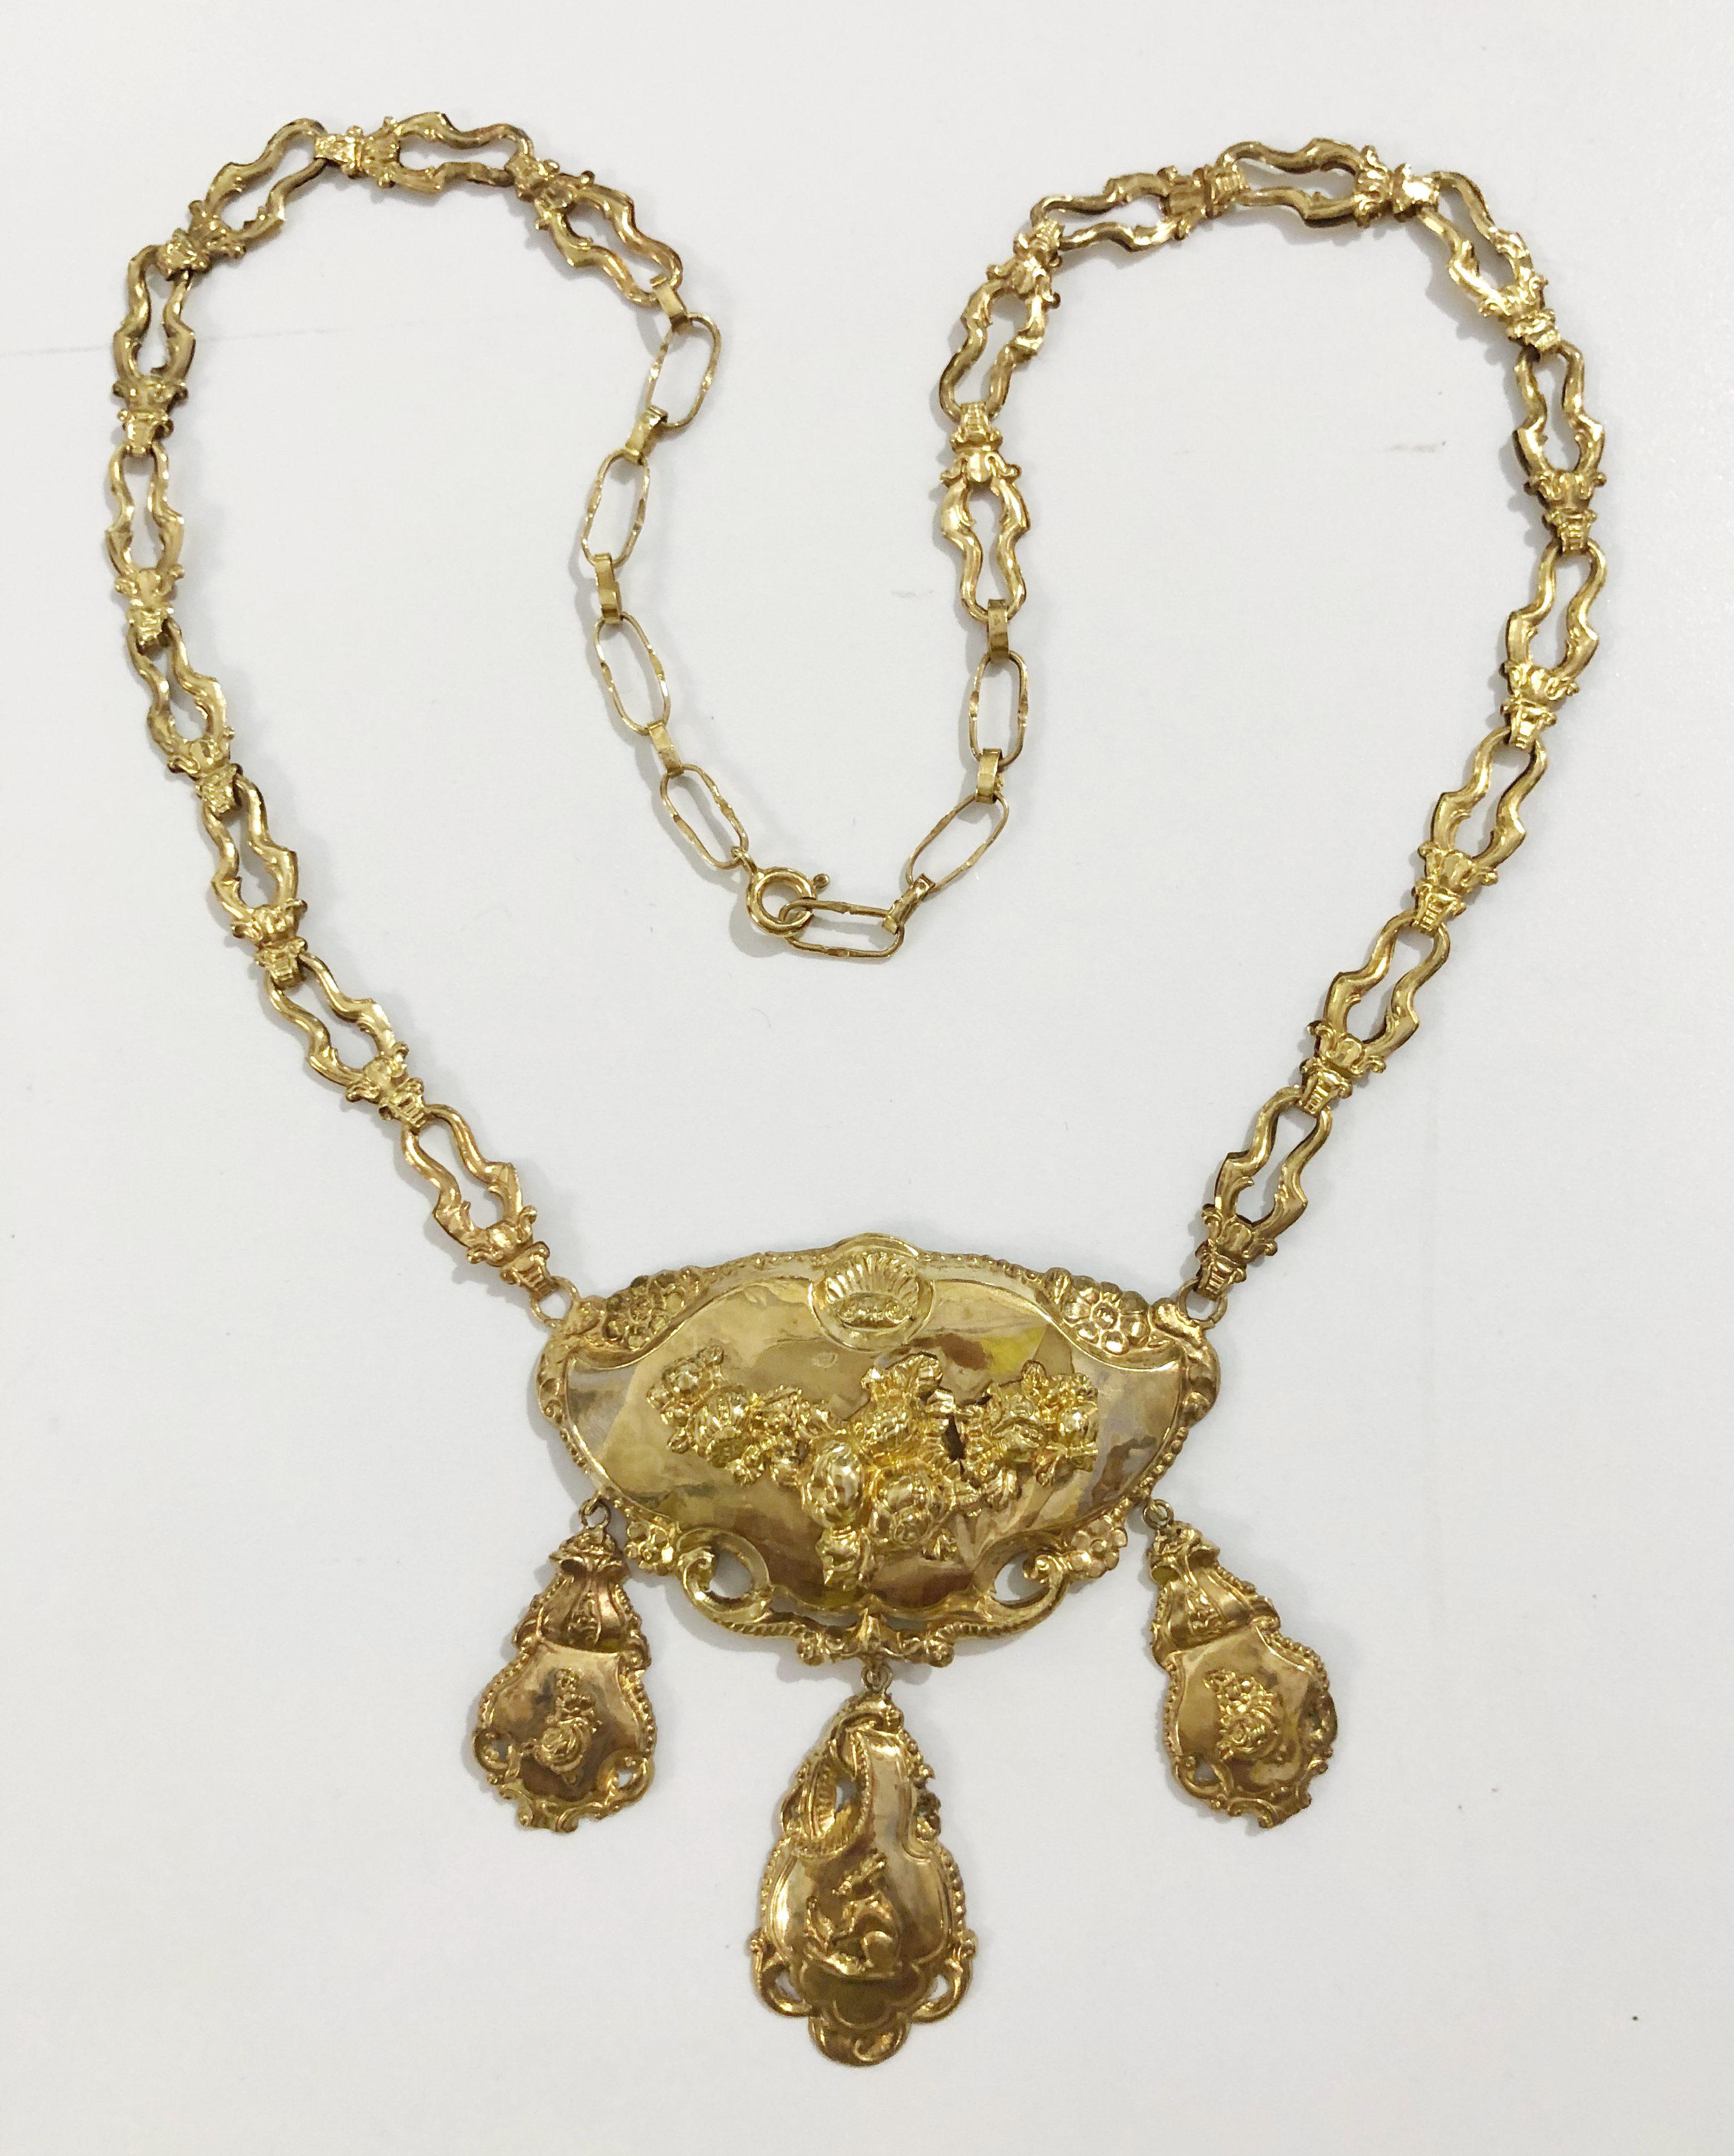 Vintage 22 karat gold necklace in embossed foil with 3 pendants, Italy early 1800s
Length 48 cm